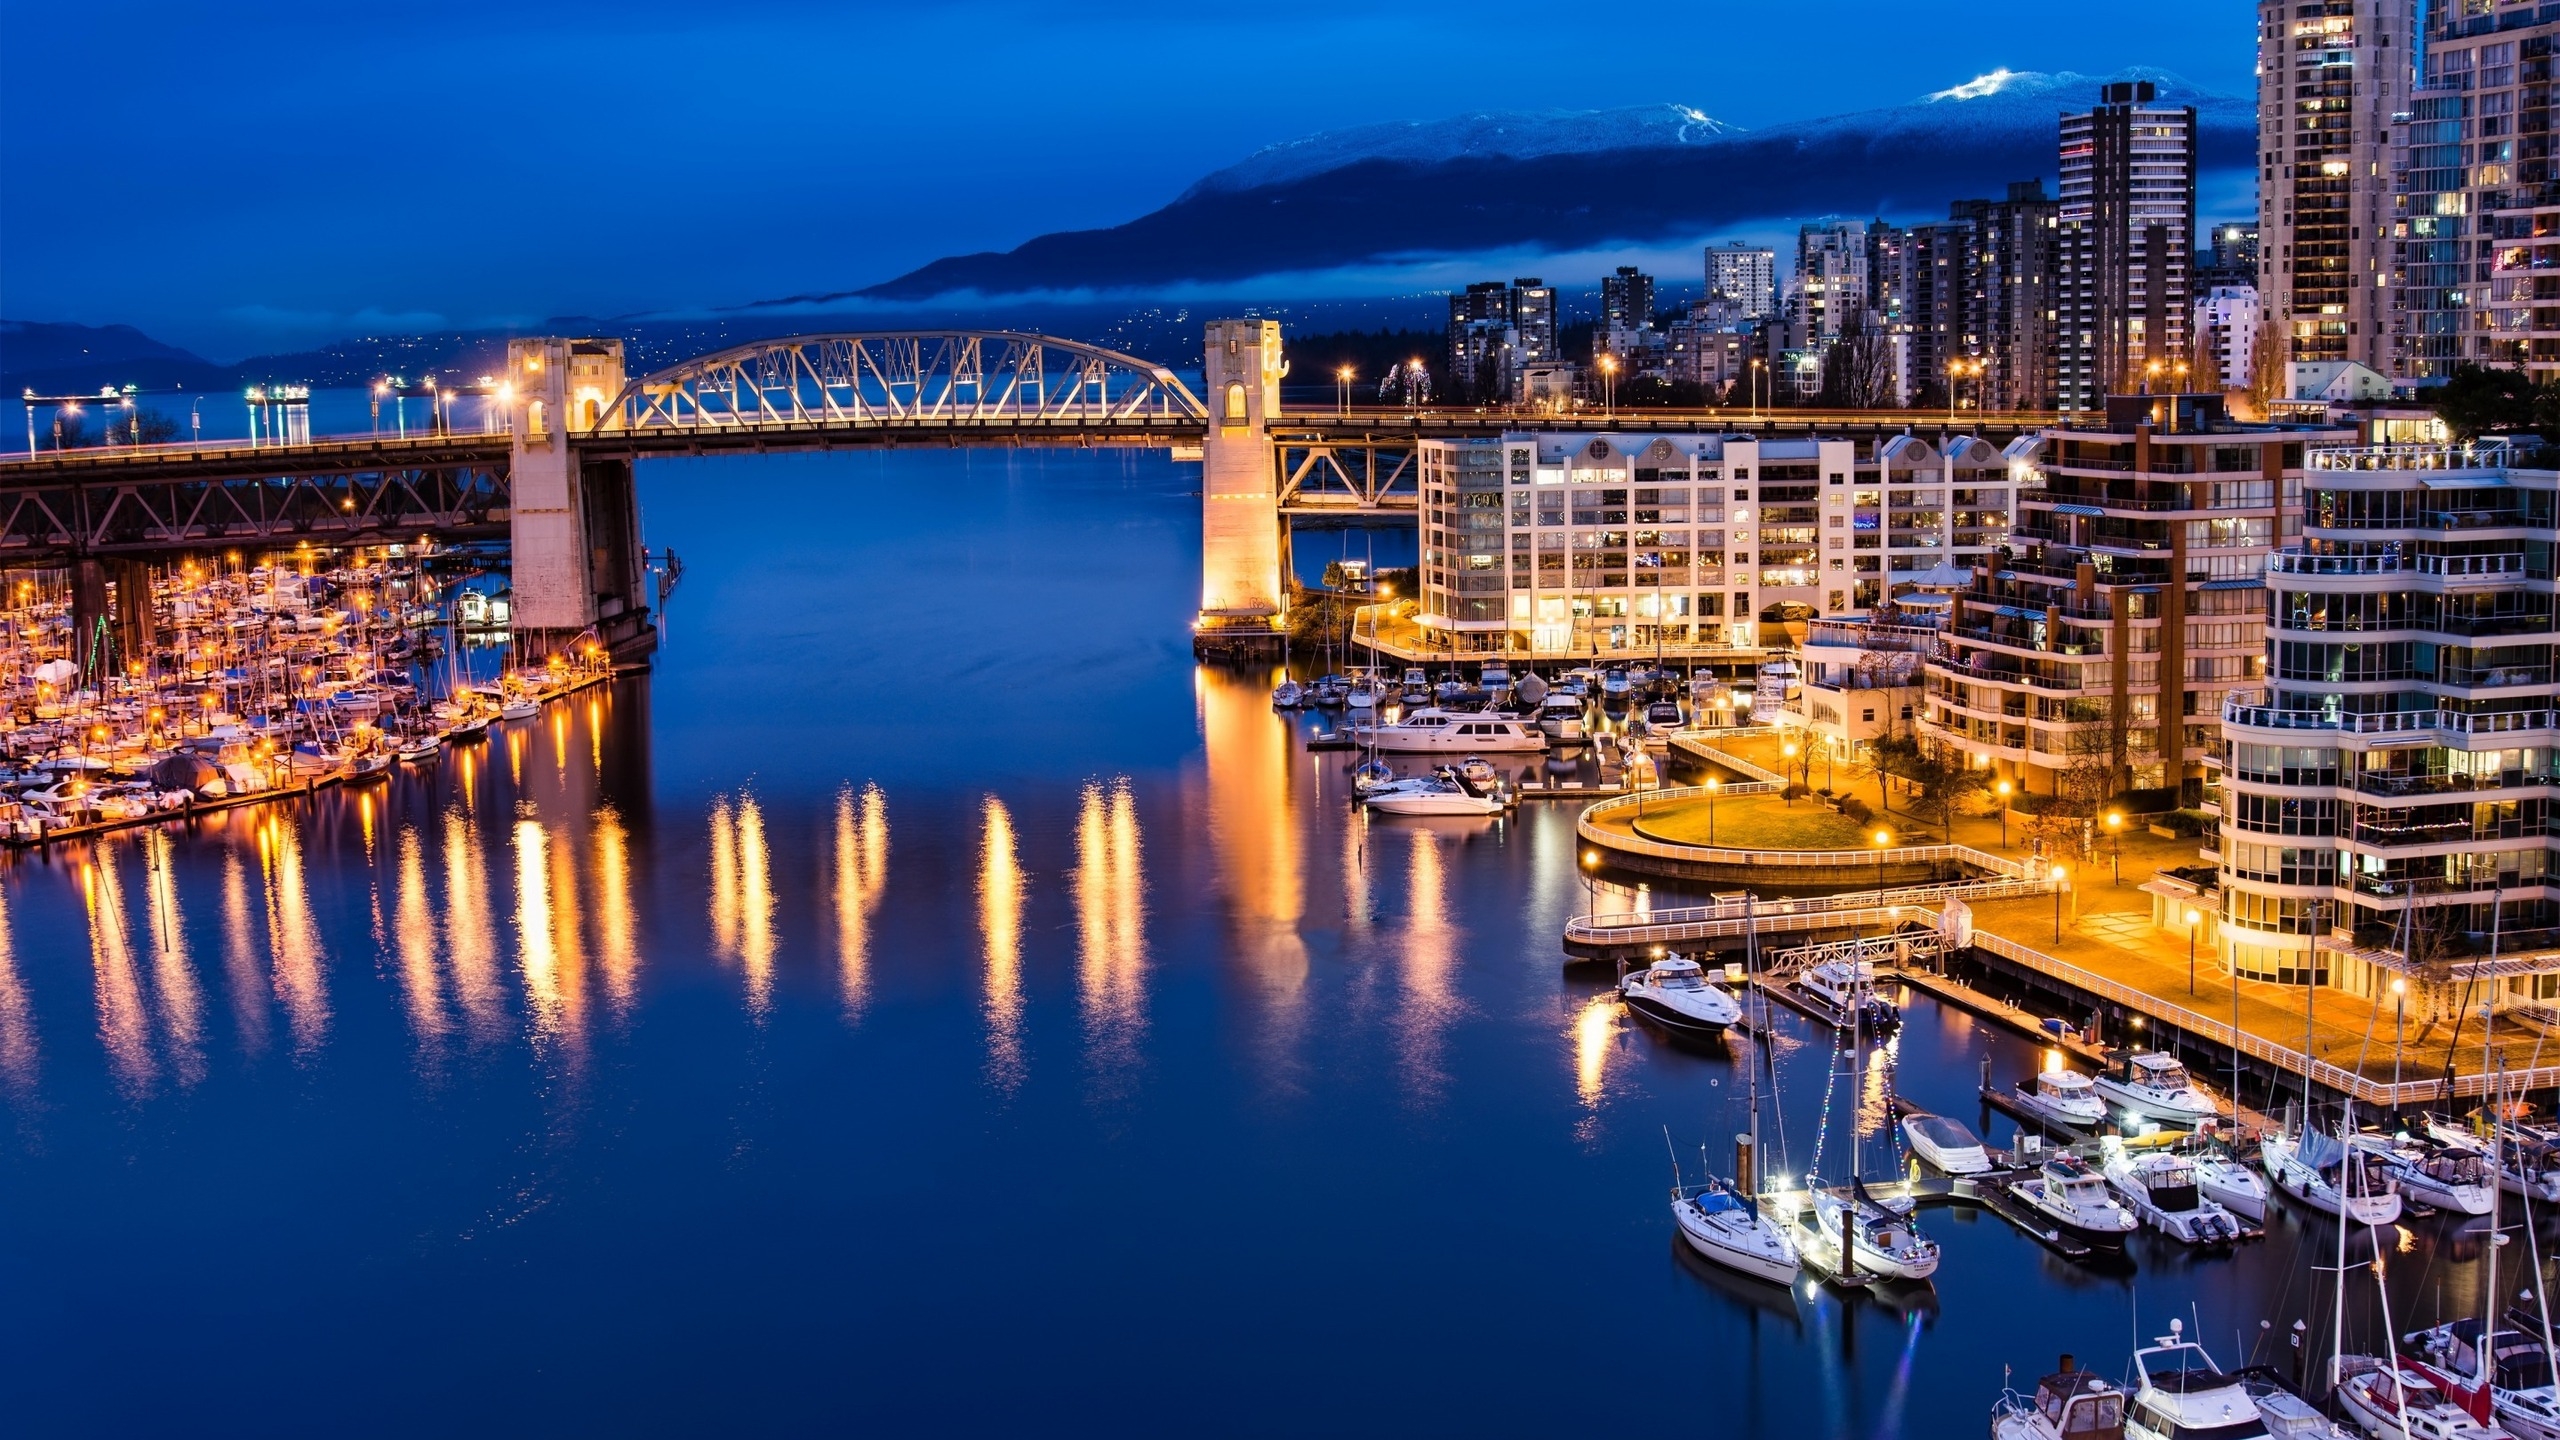 Vancouver Canada Night View for 2560x1440 HDTV resolution